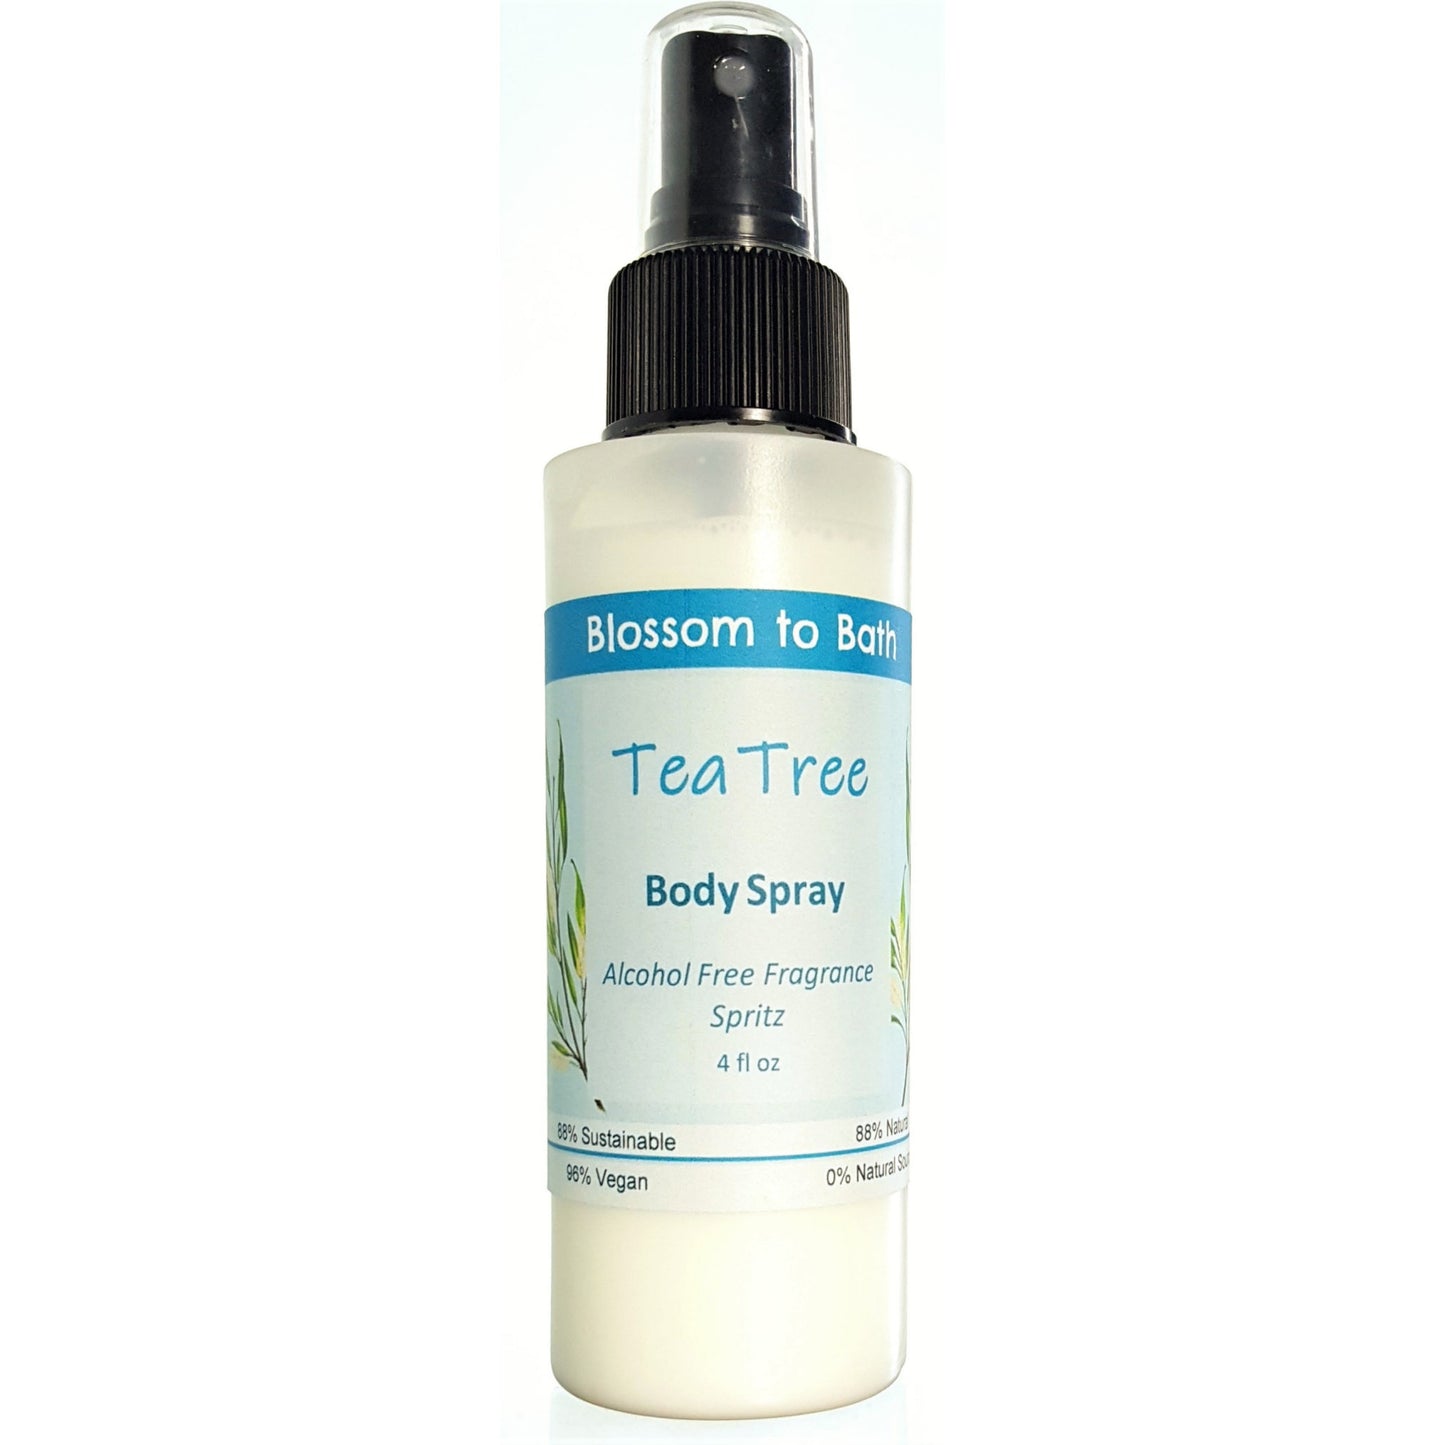 Buy Blossom to Bath Tea Tree Body Spray from Flowersong Soap Studio.  Natural luxurious freshening of skin, linens, or air  Tea tree's fresh fragrance embodies a deep down clean.